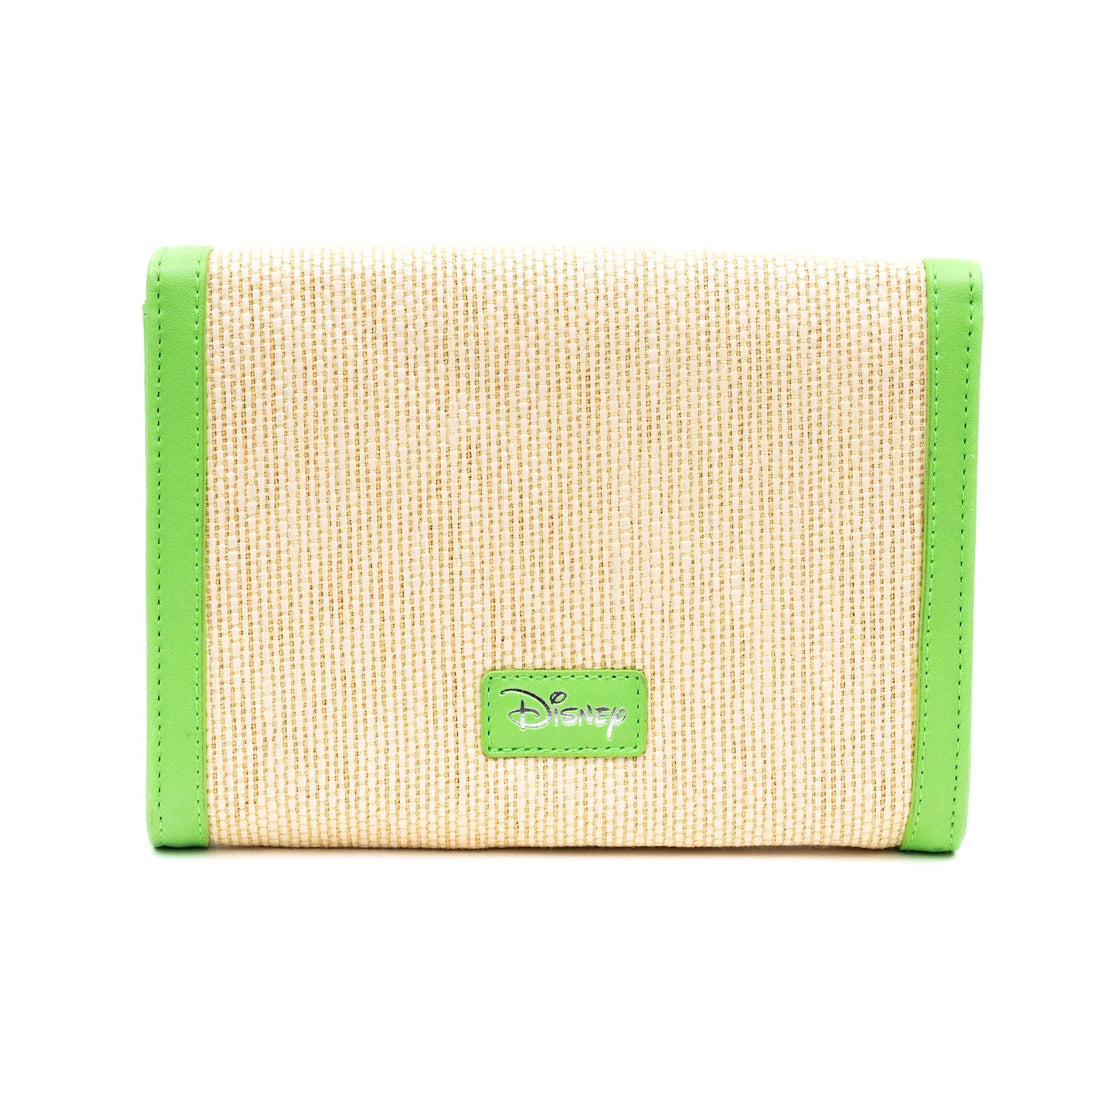 Shop Buckle Down Mickey Mouse Lime Raffia Cross Body Bag - Premium Cross Body Bag from Buckle Down Products Online now at Spoiled Brat 